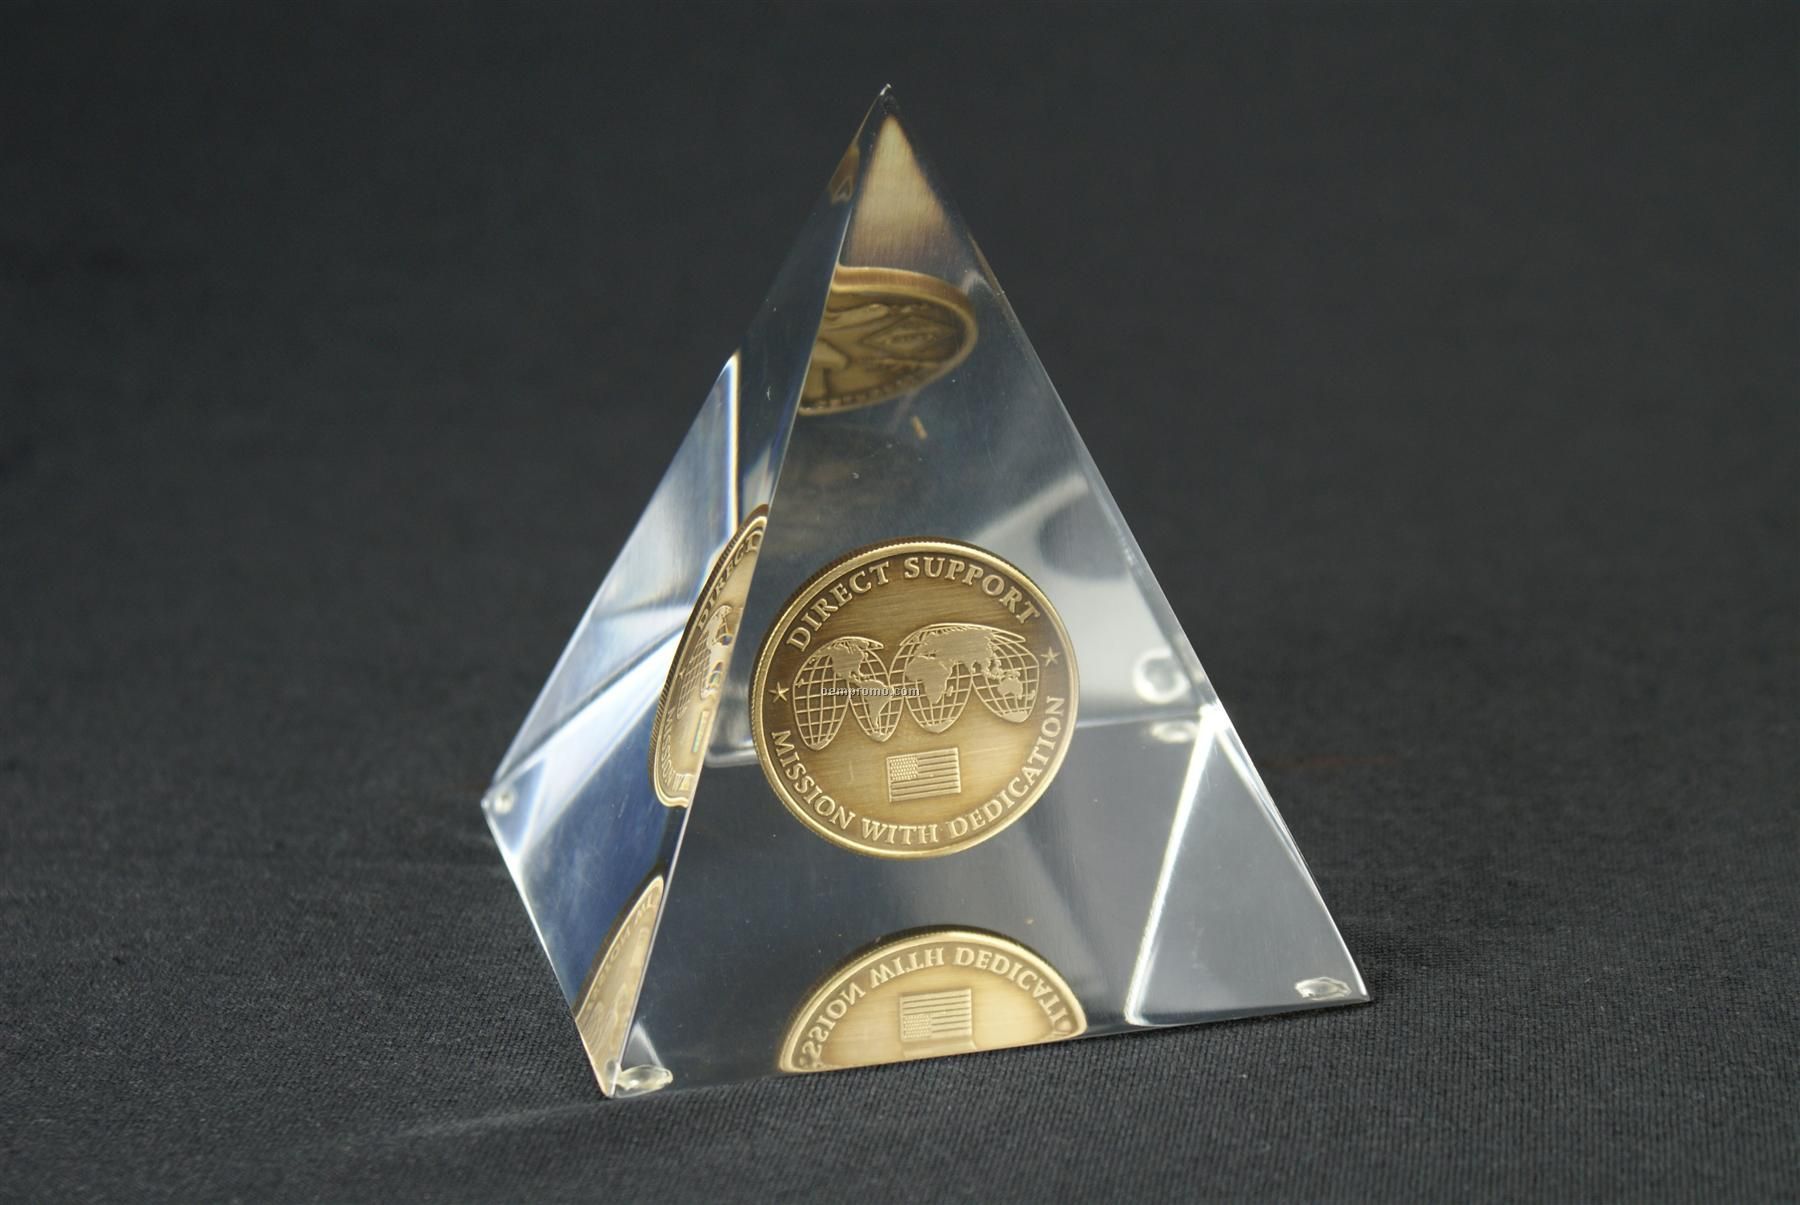 Lucite Pyramid - For Embedment Only (3-1/2"X4-1/2")